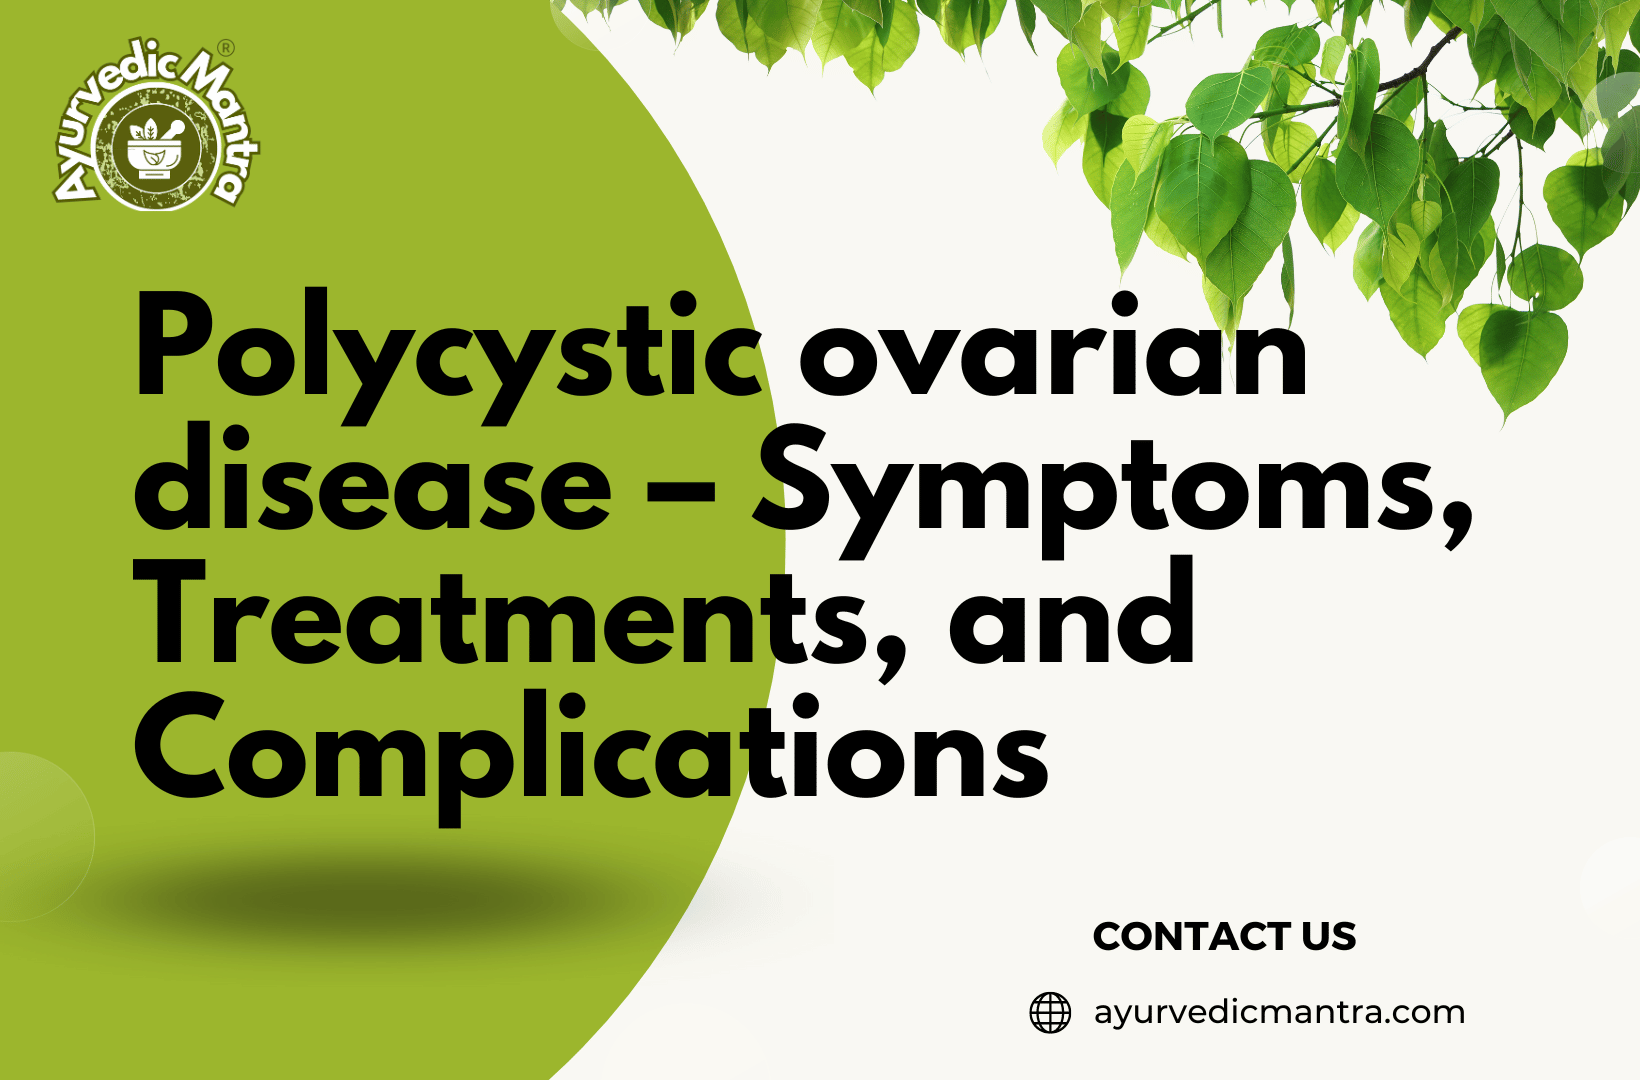 Polycystic ovarian disease – Symptoms, Treatments, and Complications